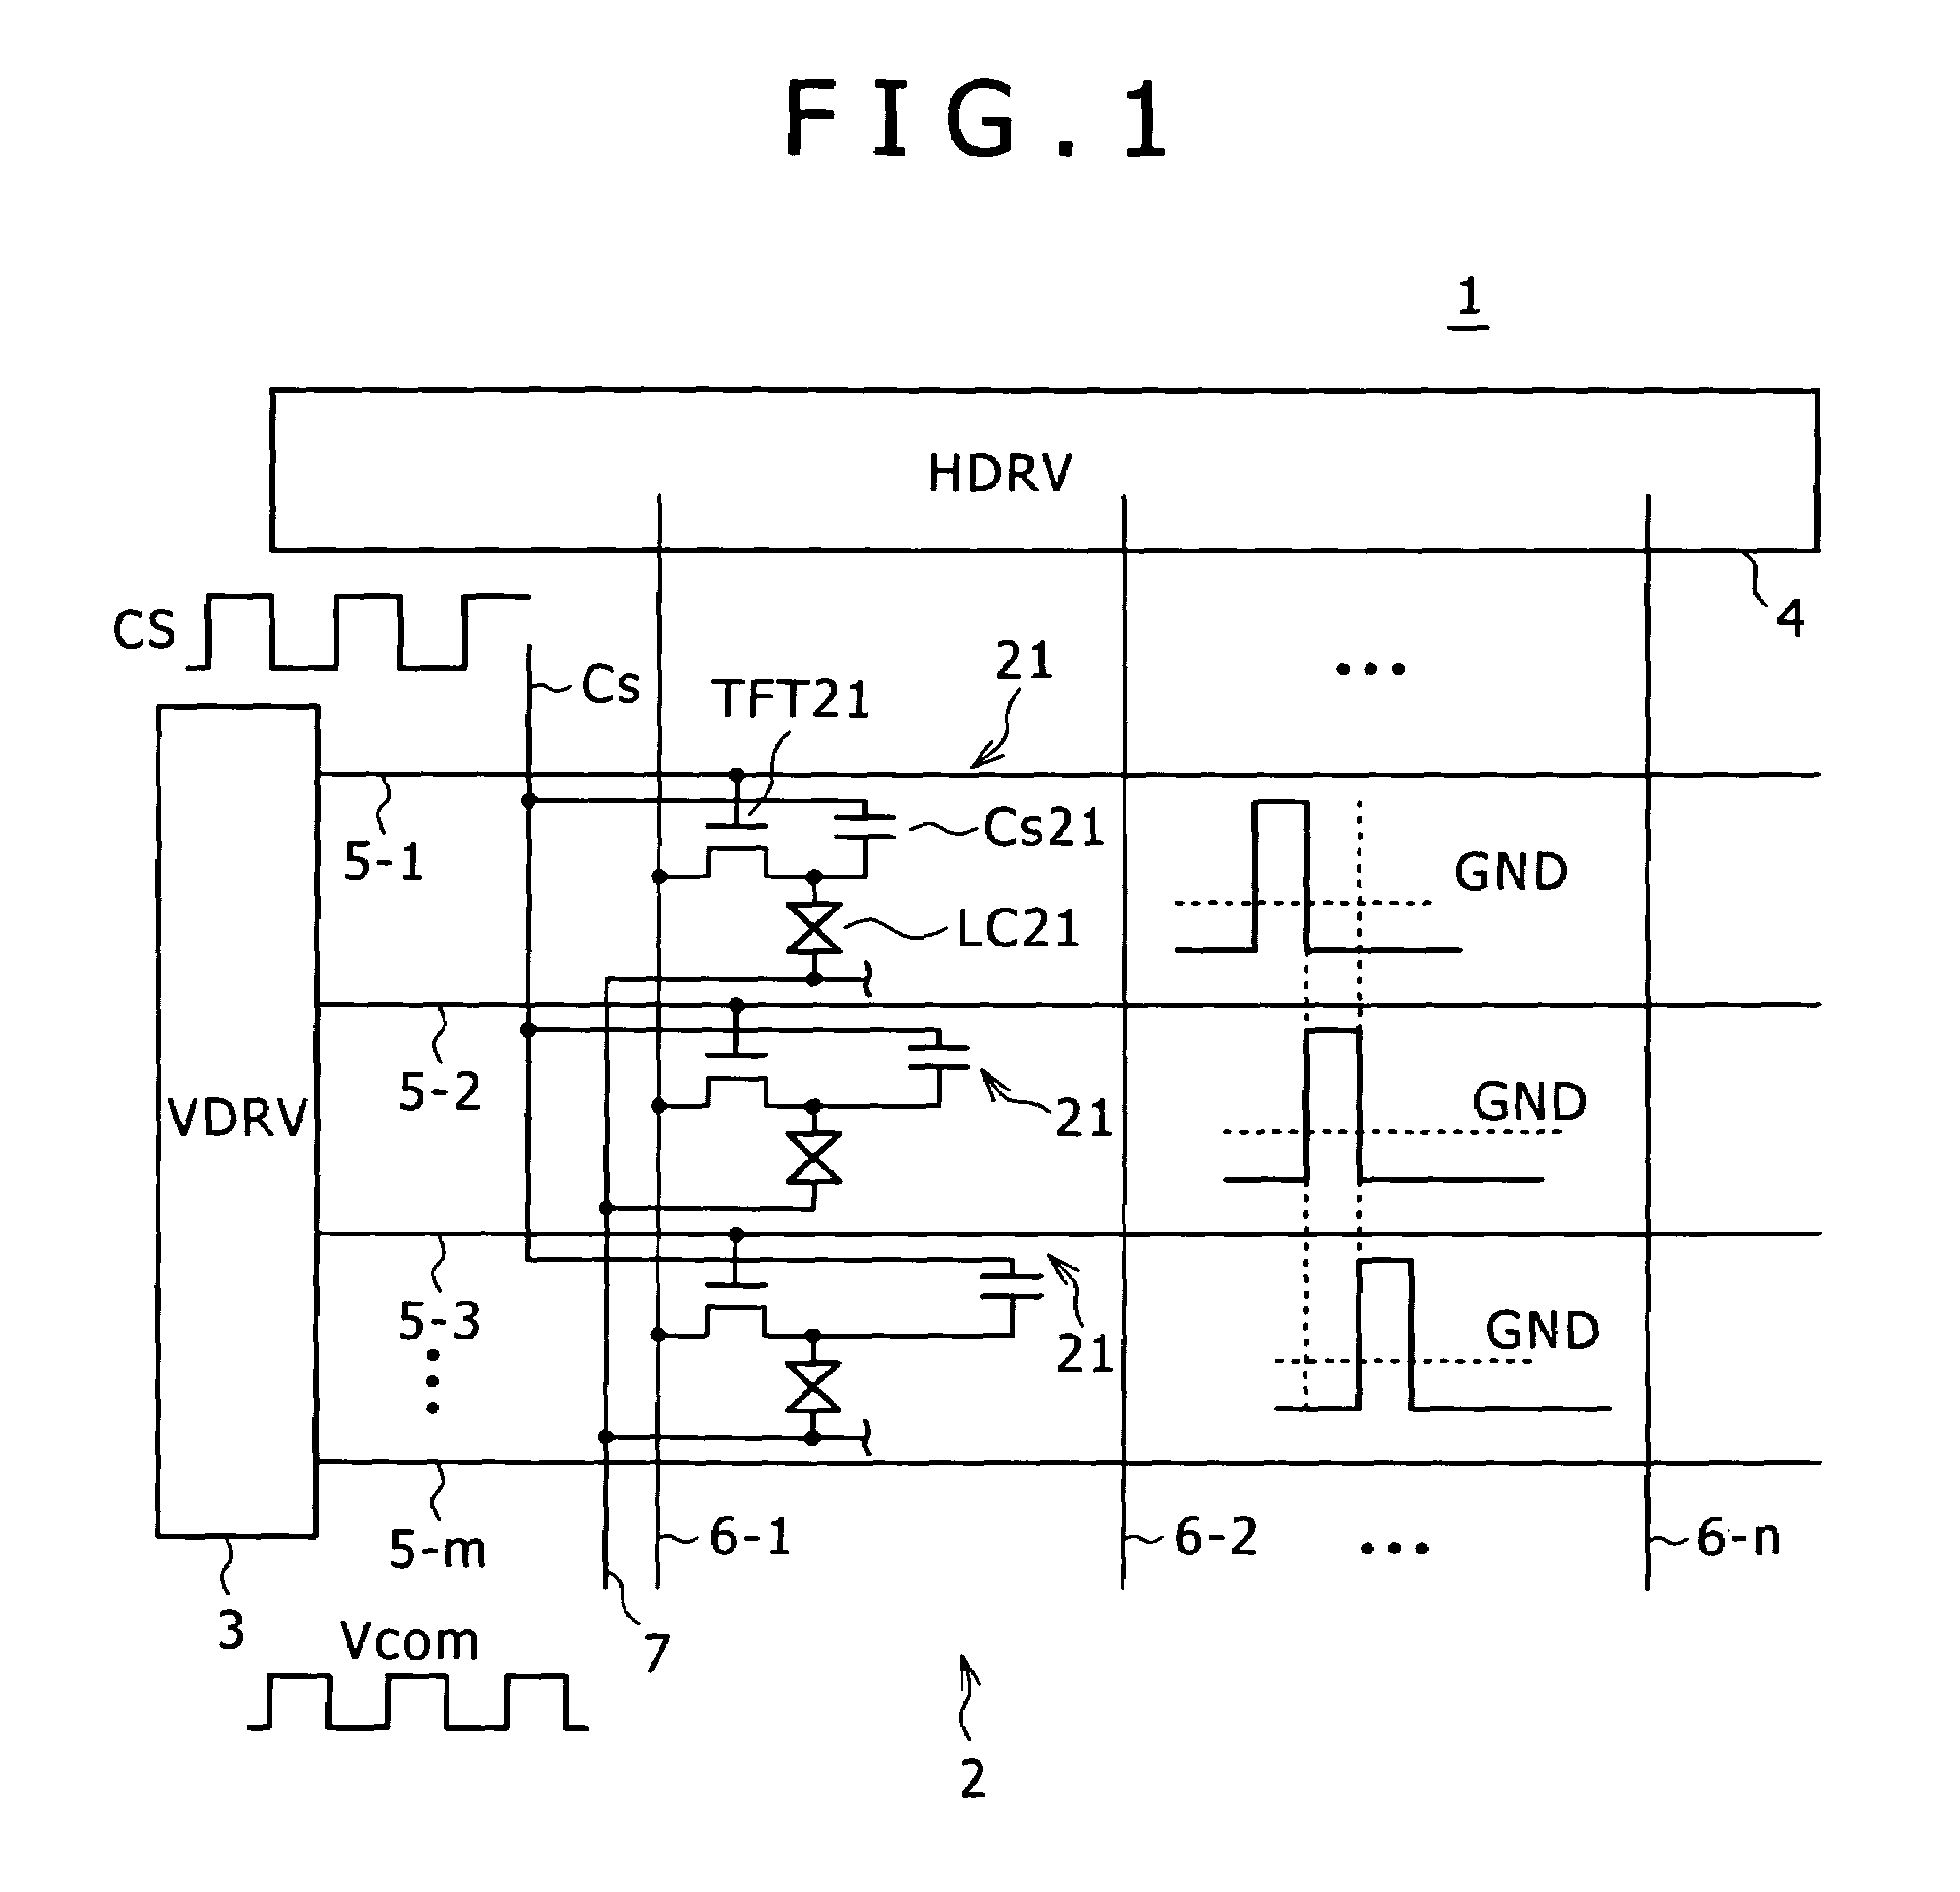 Display apparatus and electronic equipment